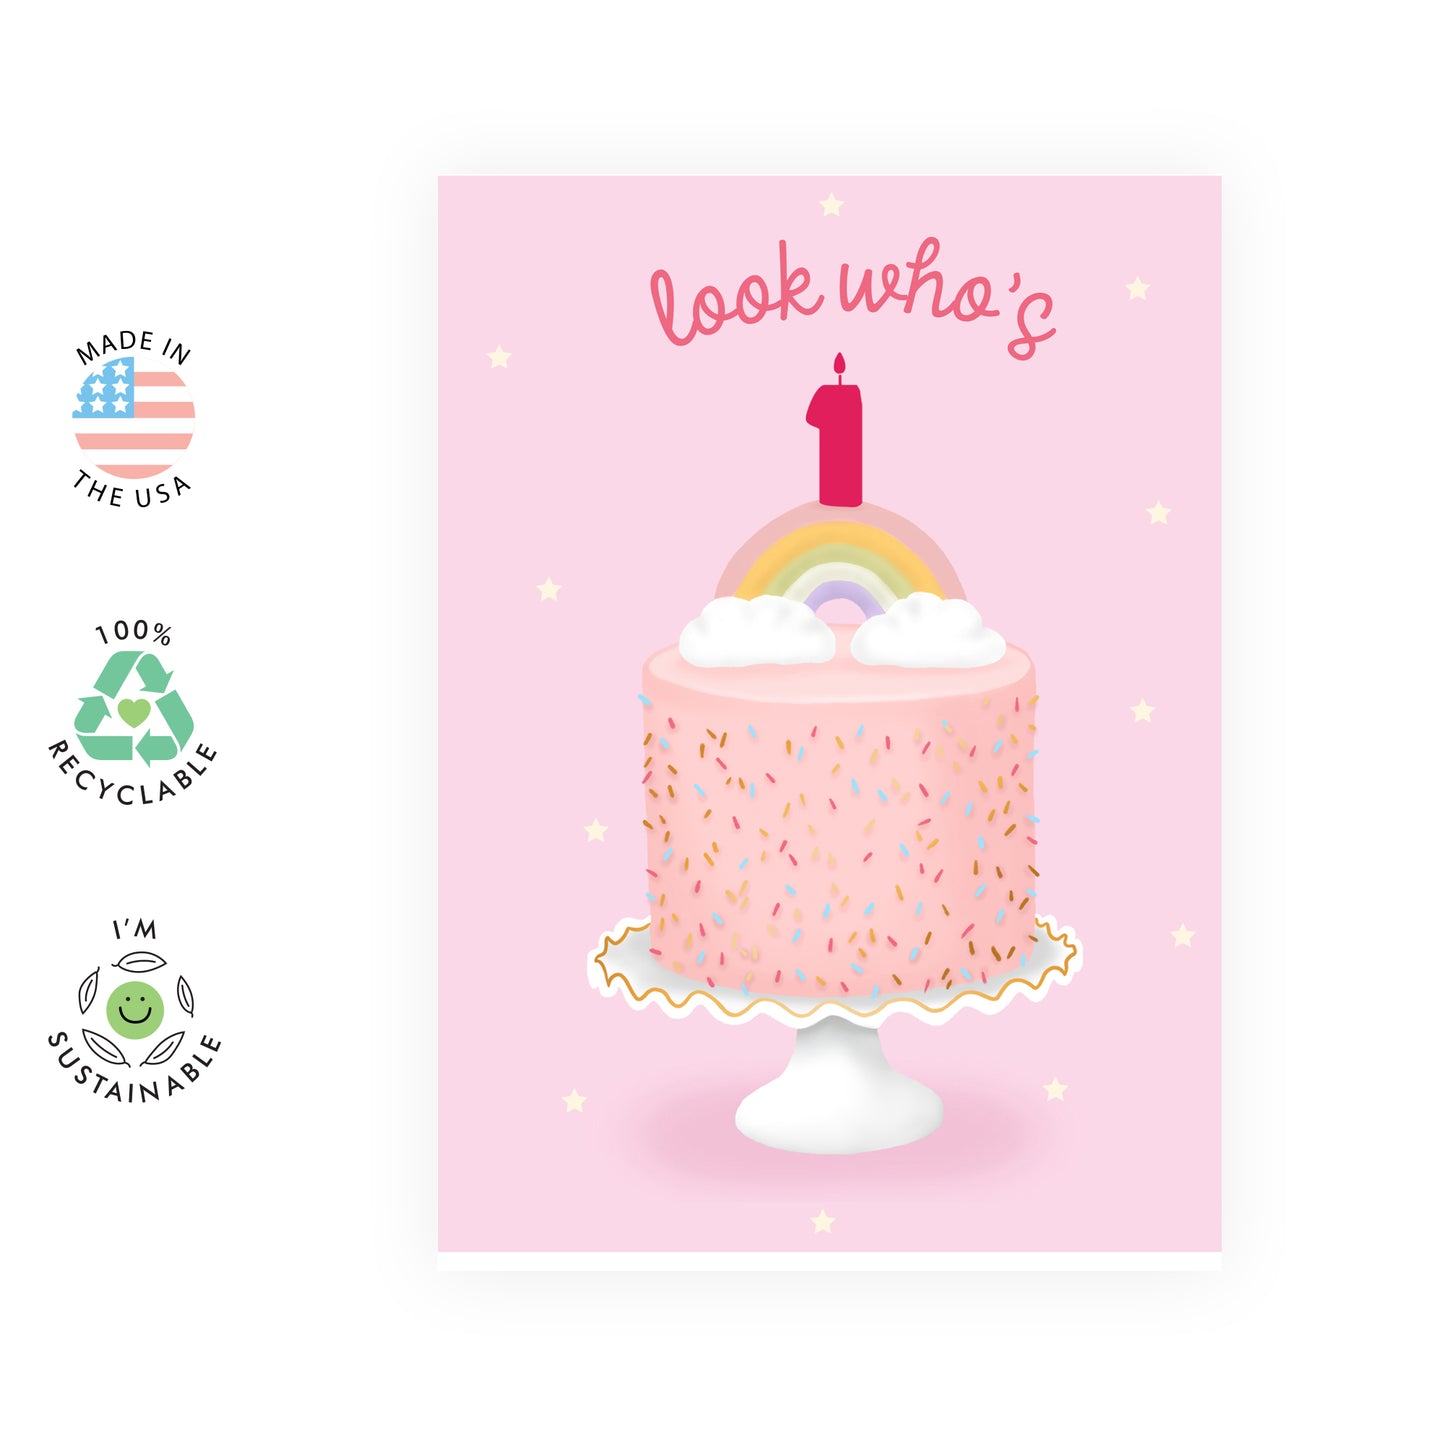 1st Birthday Card - Look Who's 1 - For Girls Kids Her